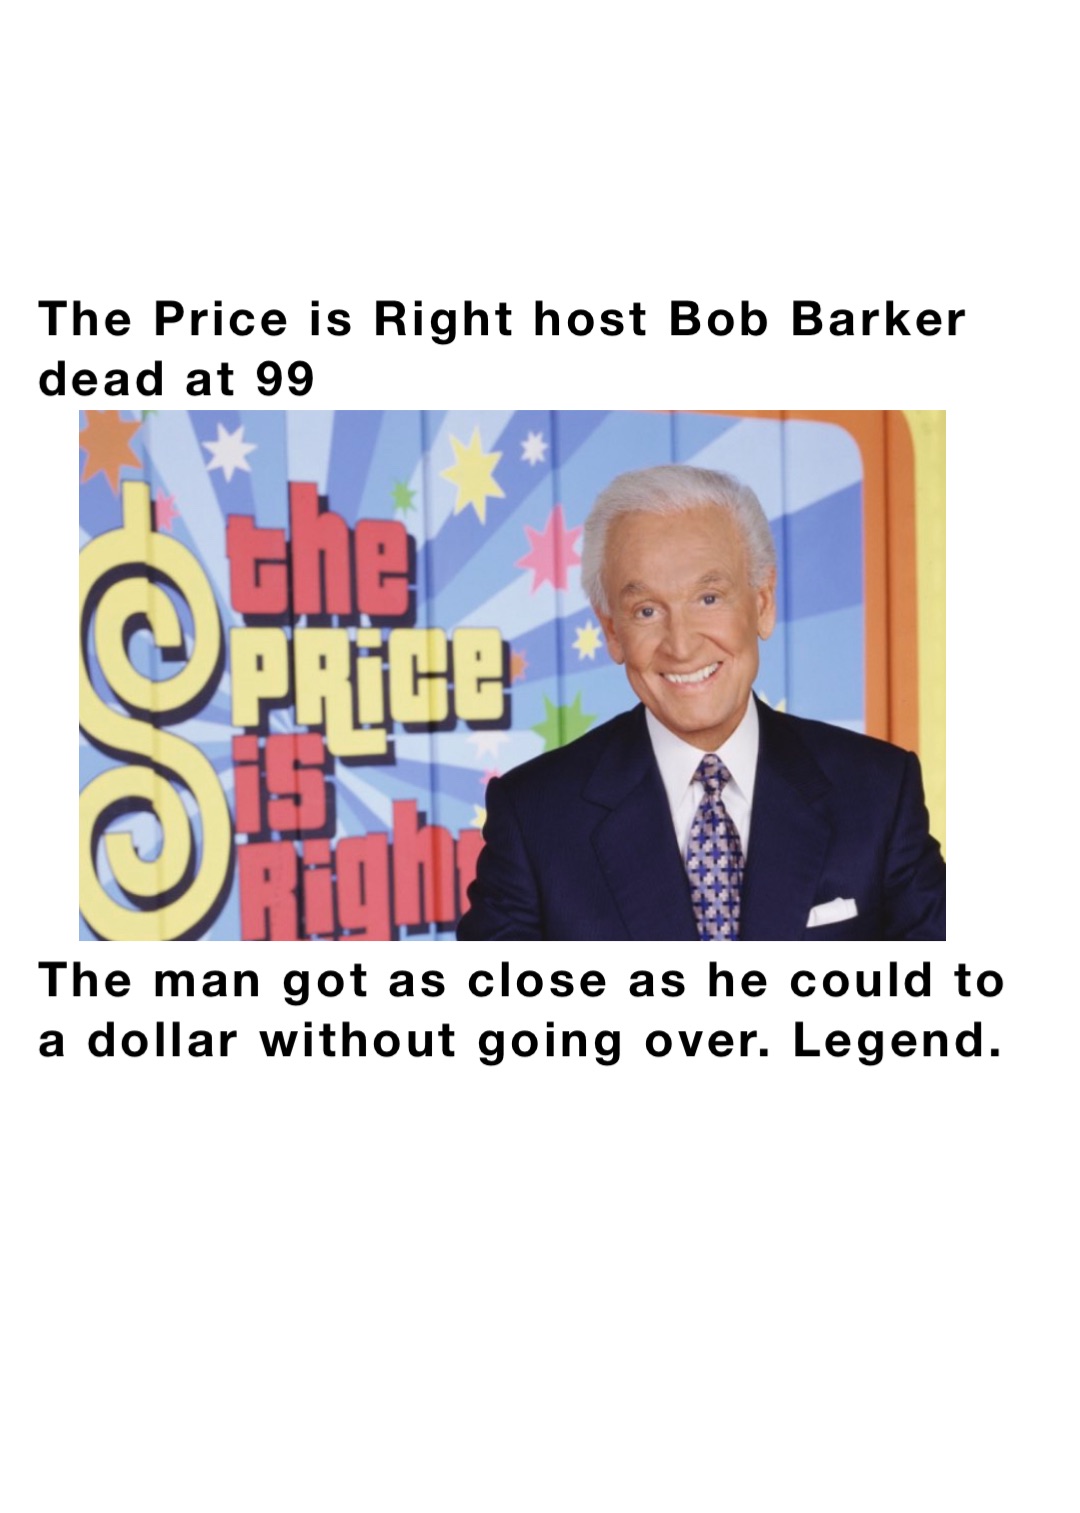 The Price is Right host Bob Barker dead at 99









The man got as close as he could to a dollar without going over. Legend.